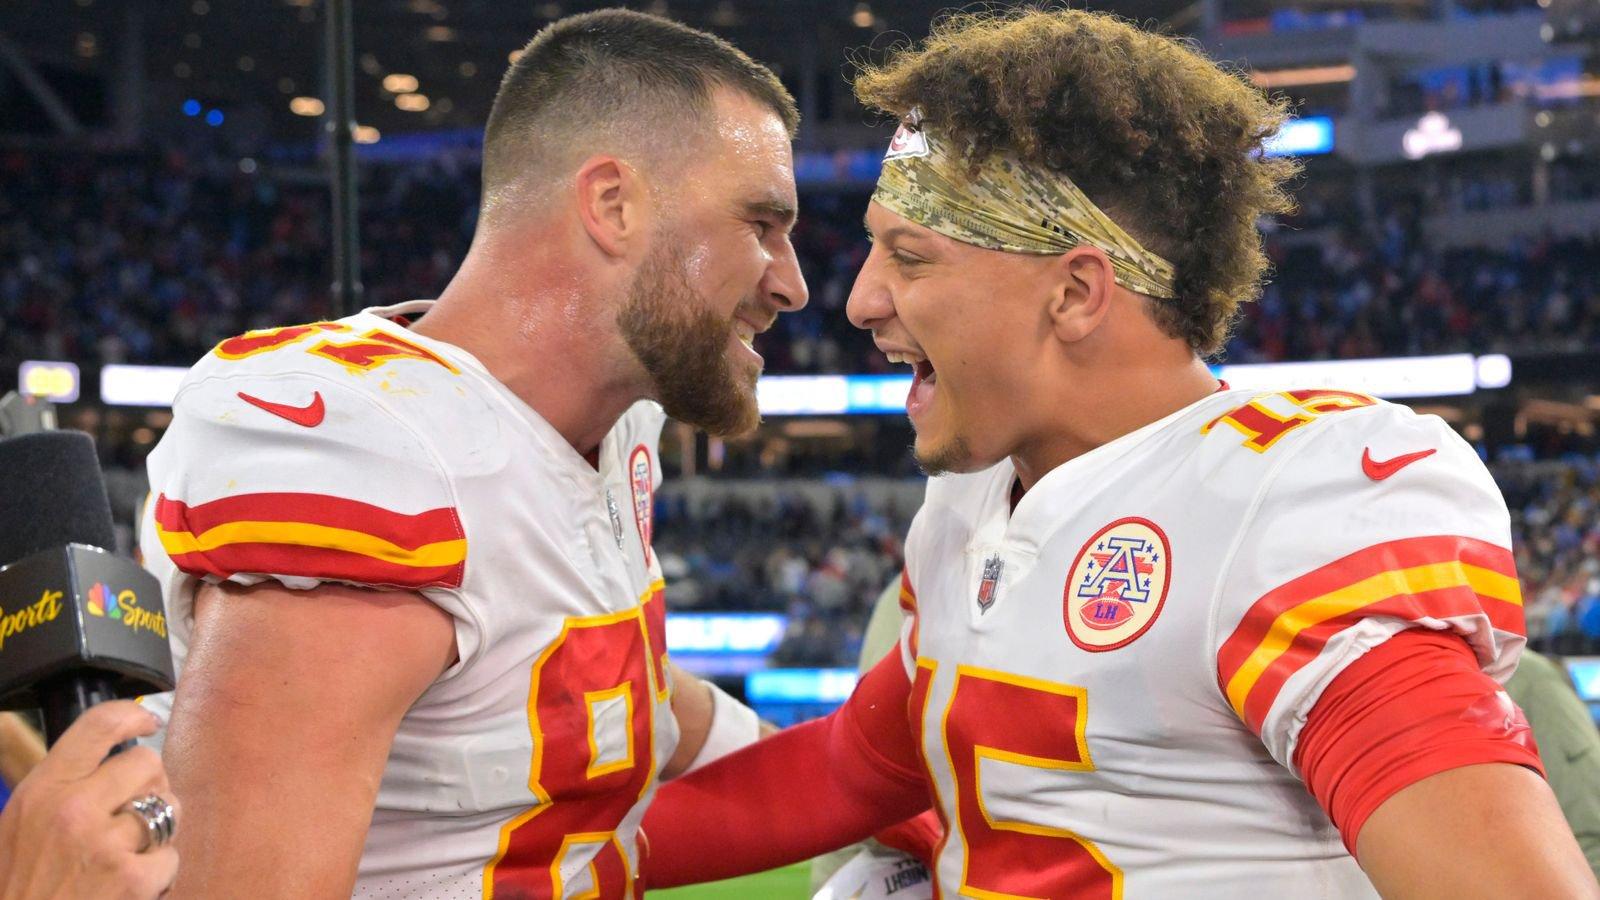 Rams vs Chiefs Prediction & Picks: Will Mahomes inflict more misery on the champs?